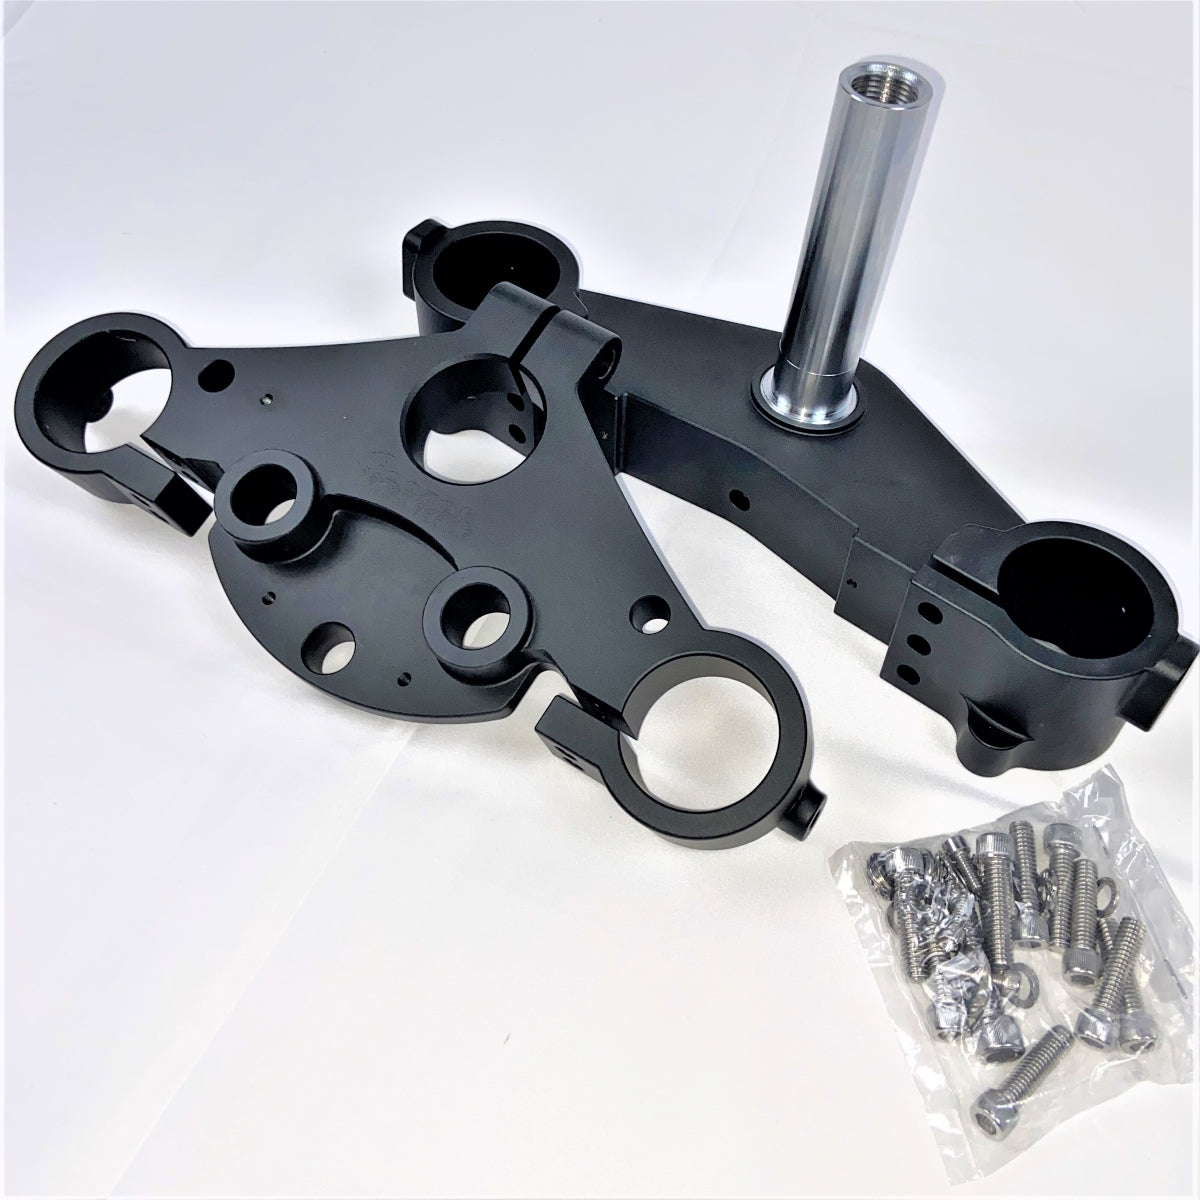 GeezerEngineering Reduced Trail Triple-Tree Kit for Harley 2014 & later Touring Models